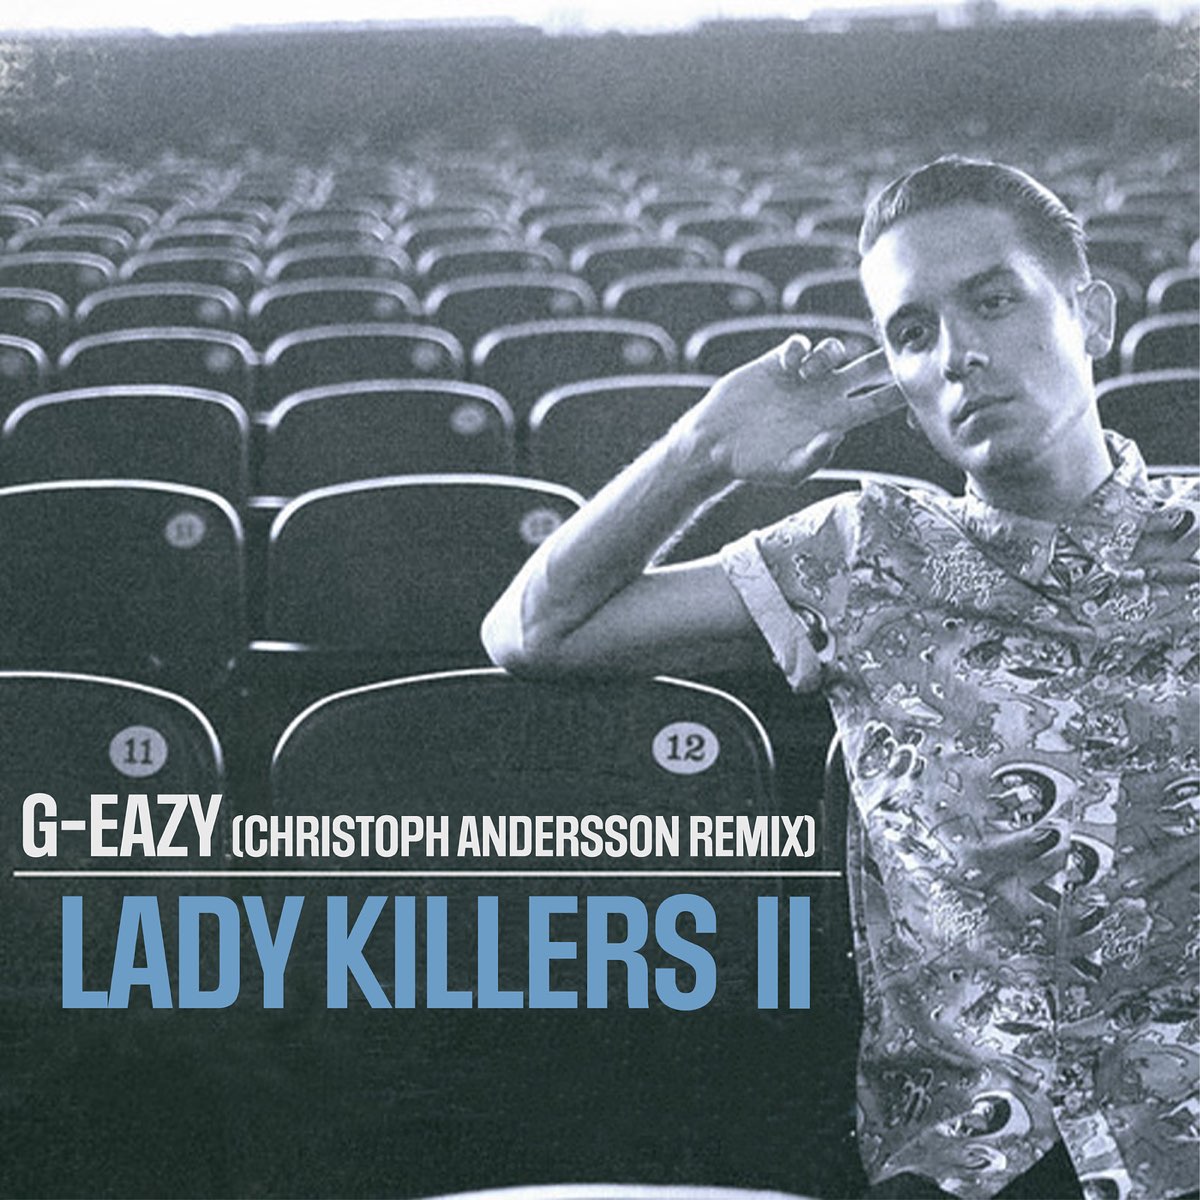 G-Eazy Lady Killers II (Christoph Andersson Remix) cover artwork